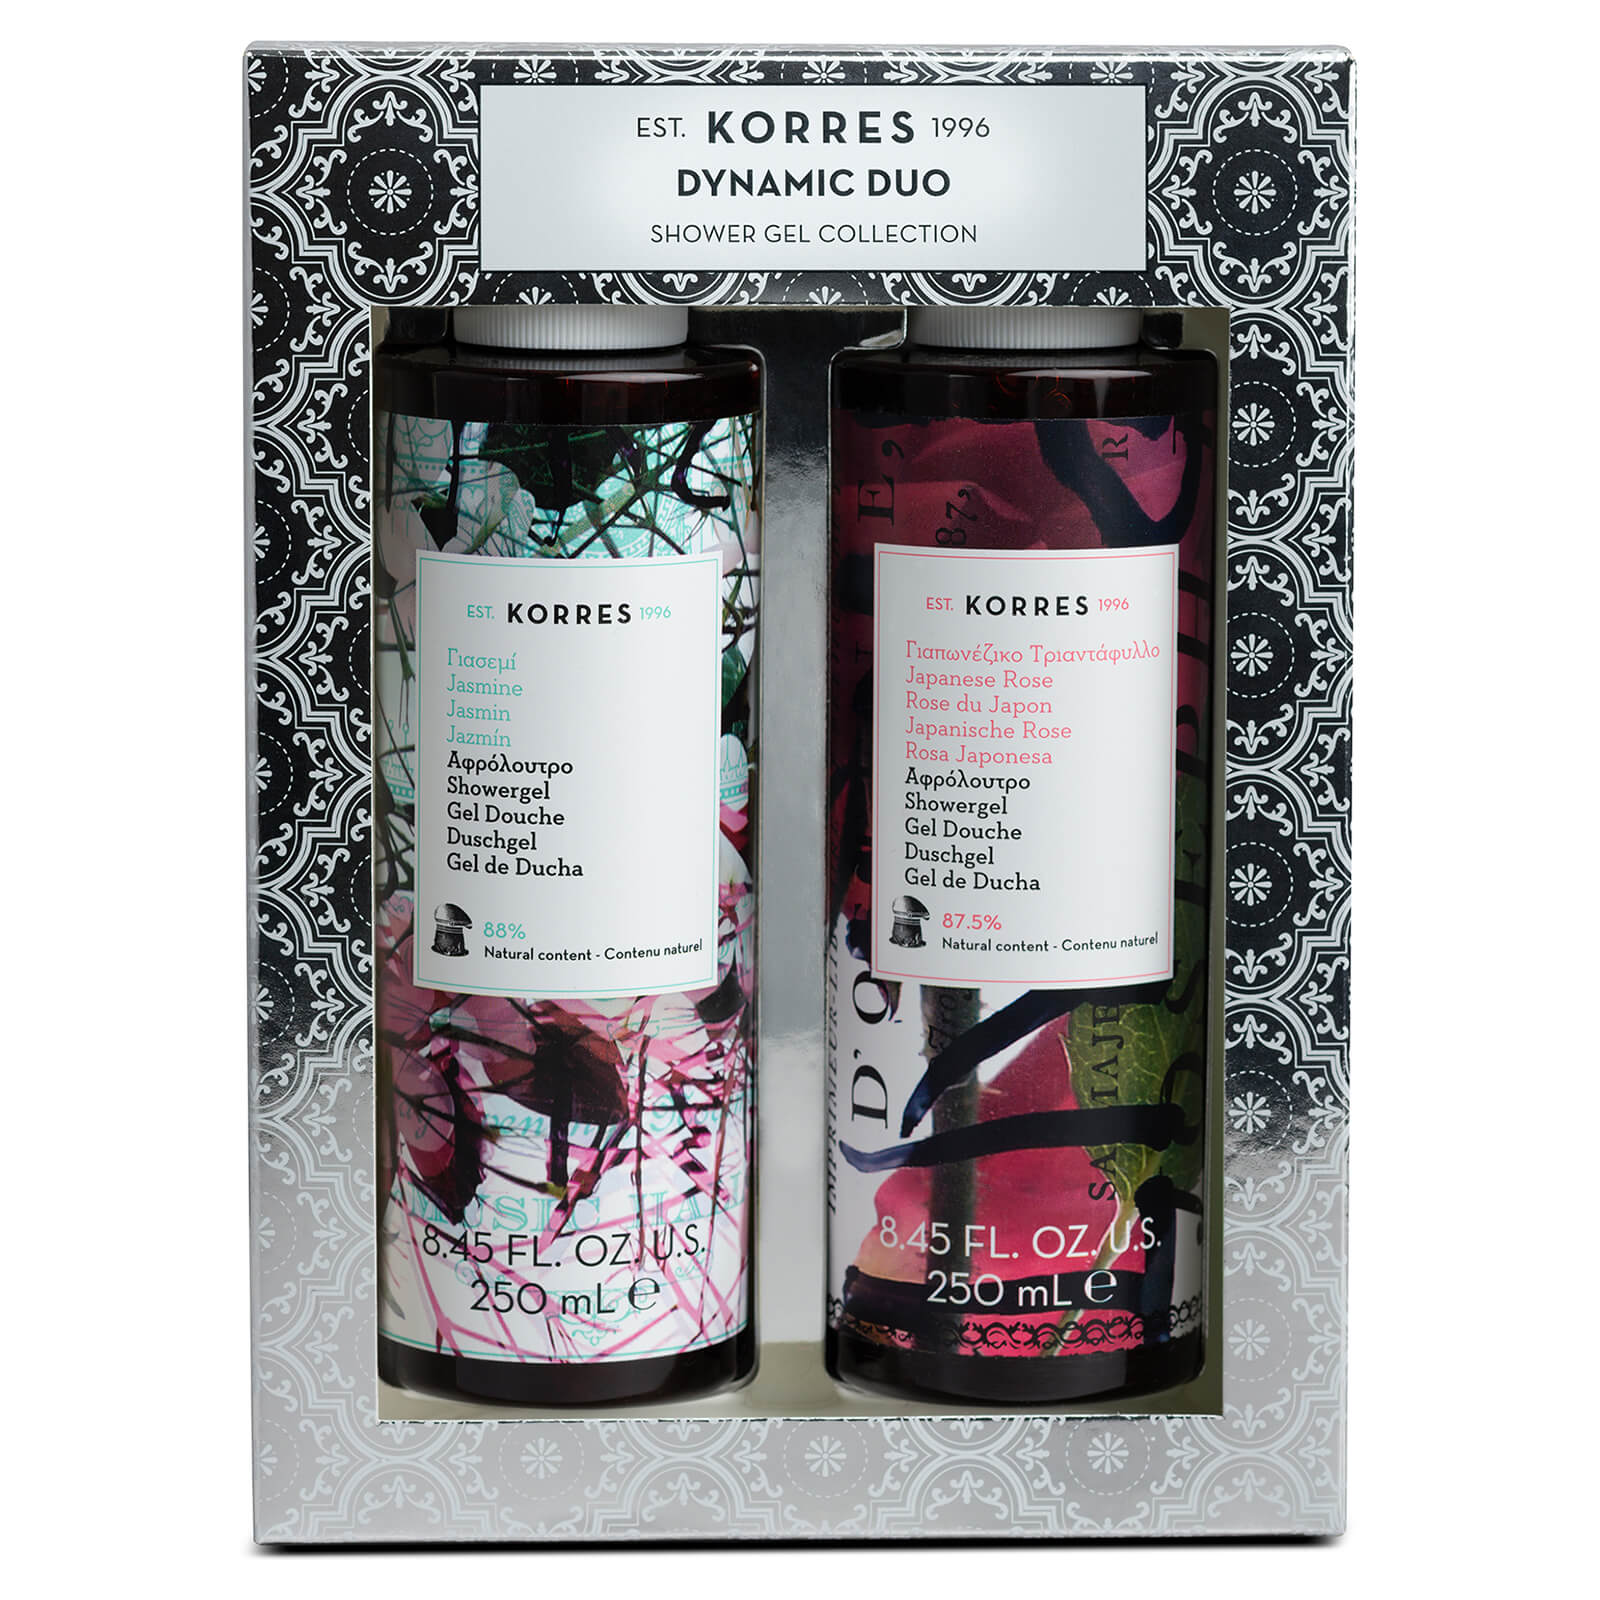 KORRES Dynamic Duo Japanese Rose and Jasmine Shower Gel Collection